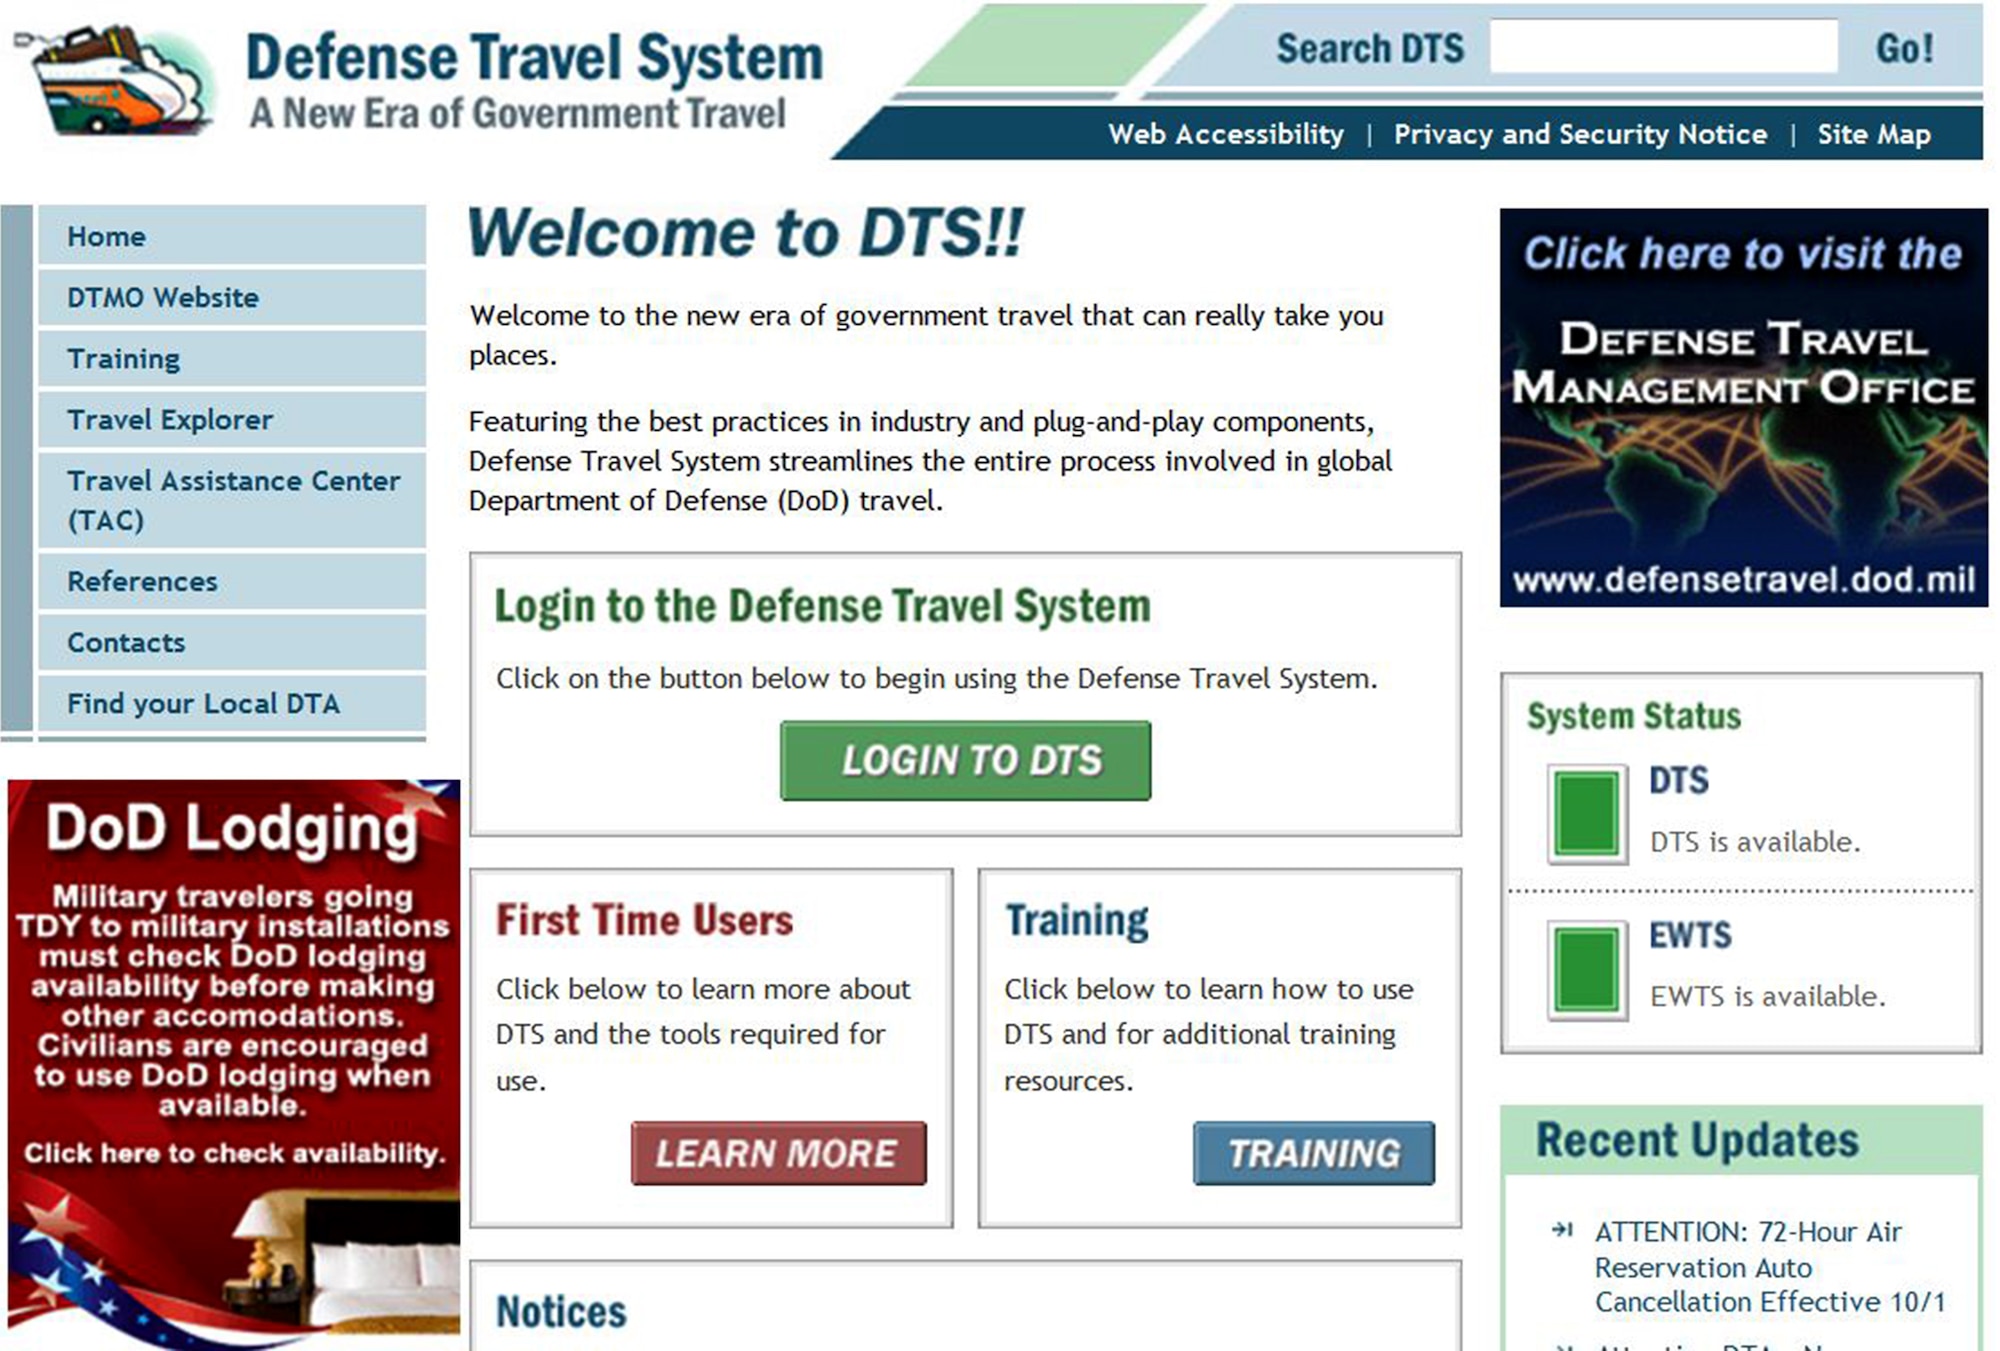 Air Force Reserve Command is adding resources and changing business practices to make travel voucher processing easier for reservists. Throughout FY13 the command will increase the number of Defense Travel System travel technicians to assist reservists with their travel vouchers. (U.S. Air Force graphic)